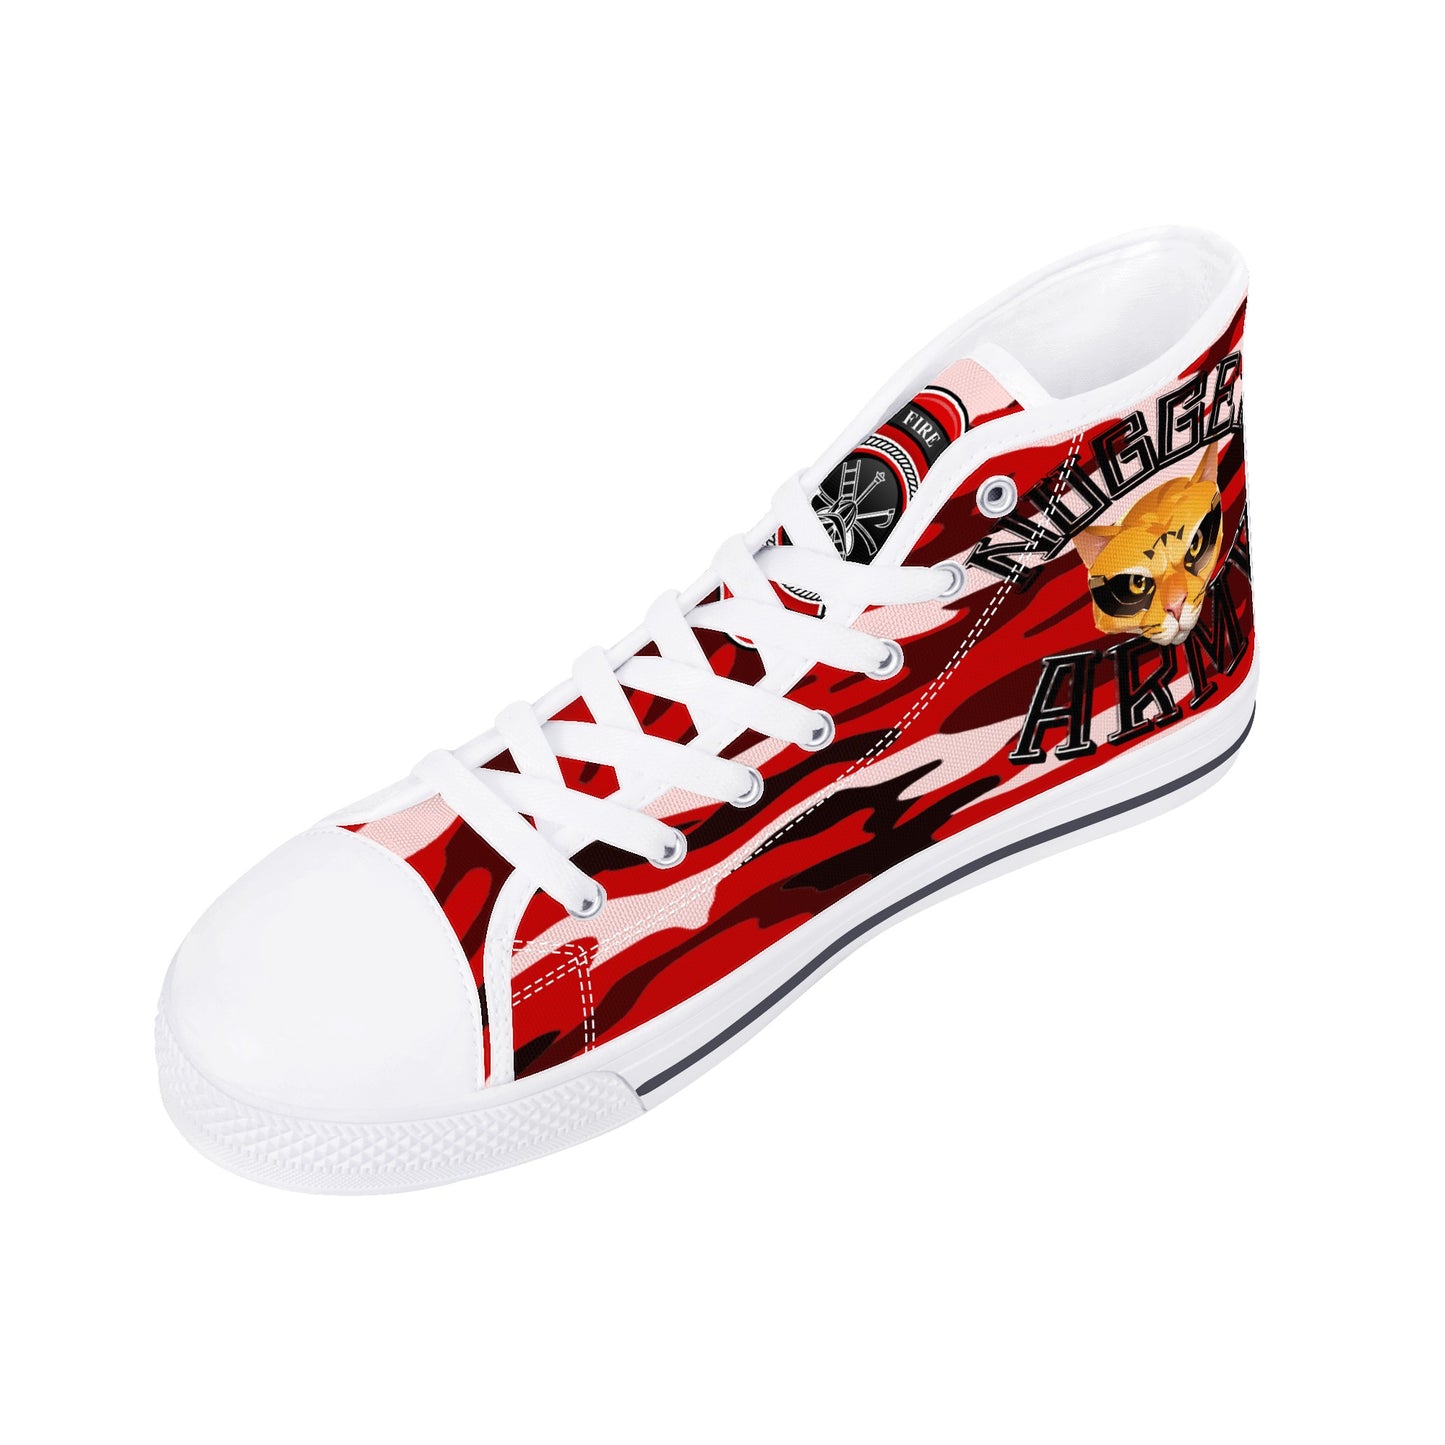 Stand out  with the  Nugget Army Fire Mens High Top Canvas Shoes  available at Hey Nugget. Grab yours today!